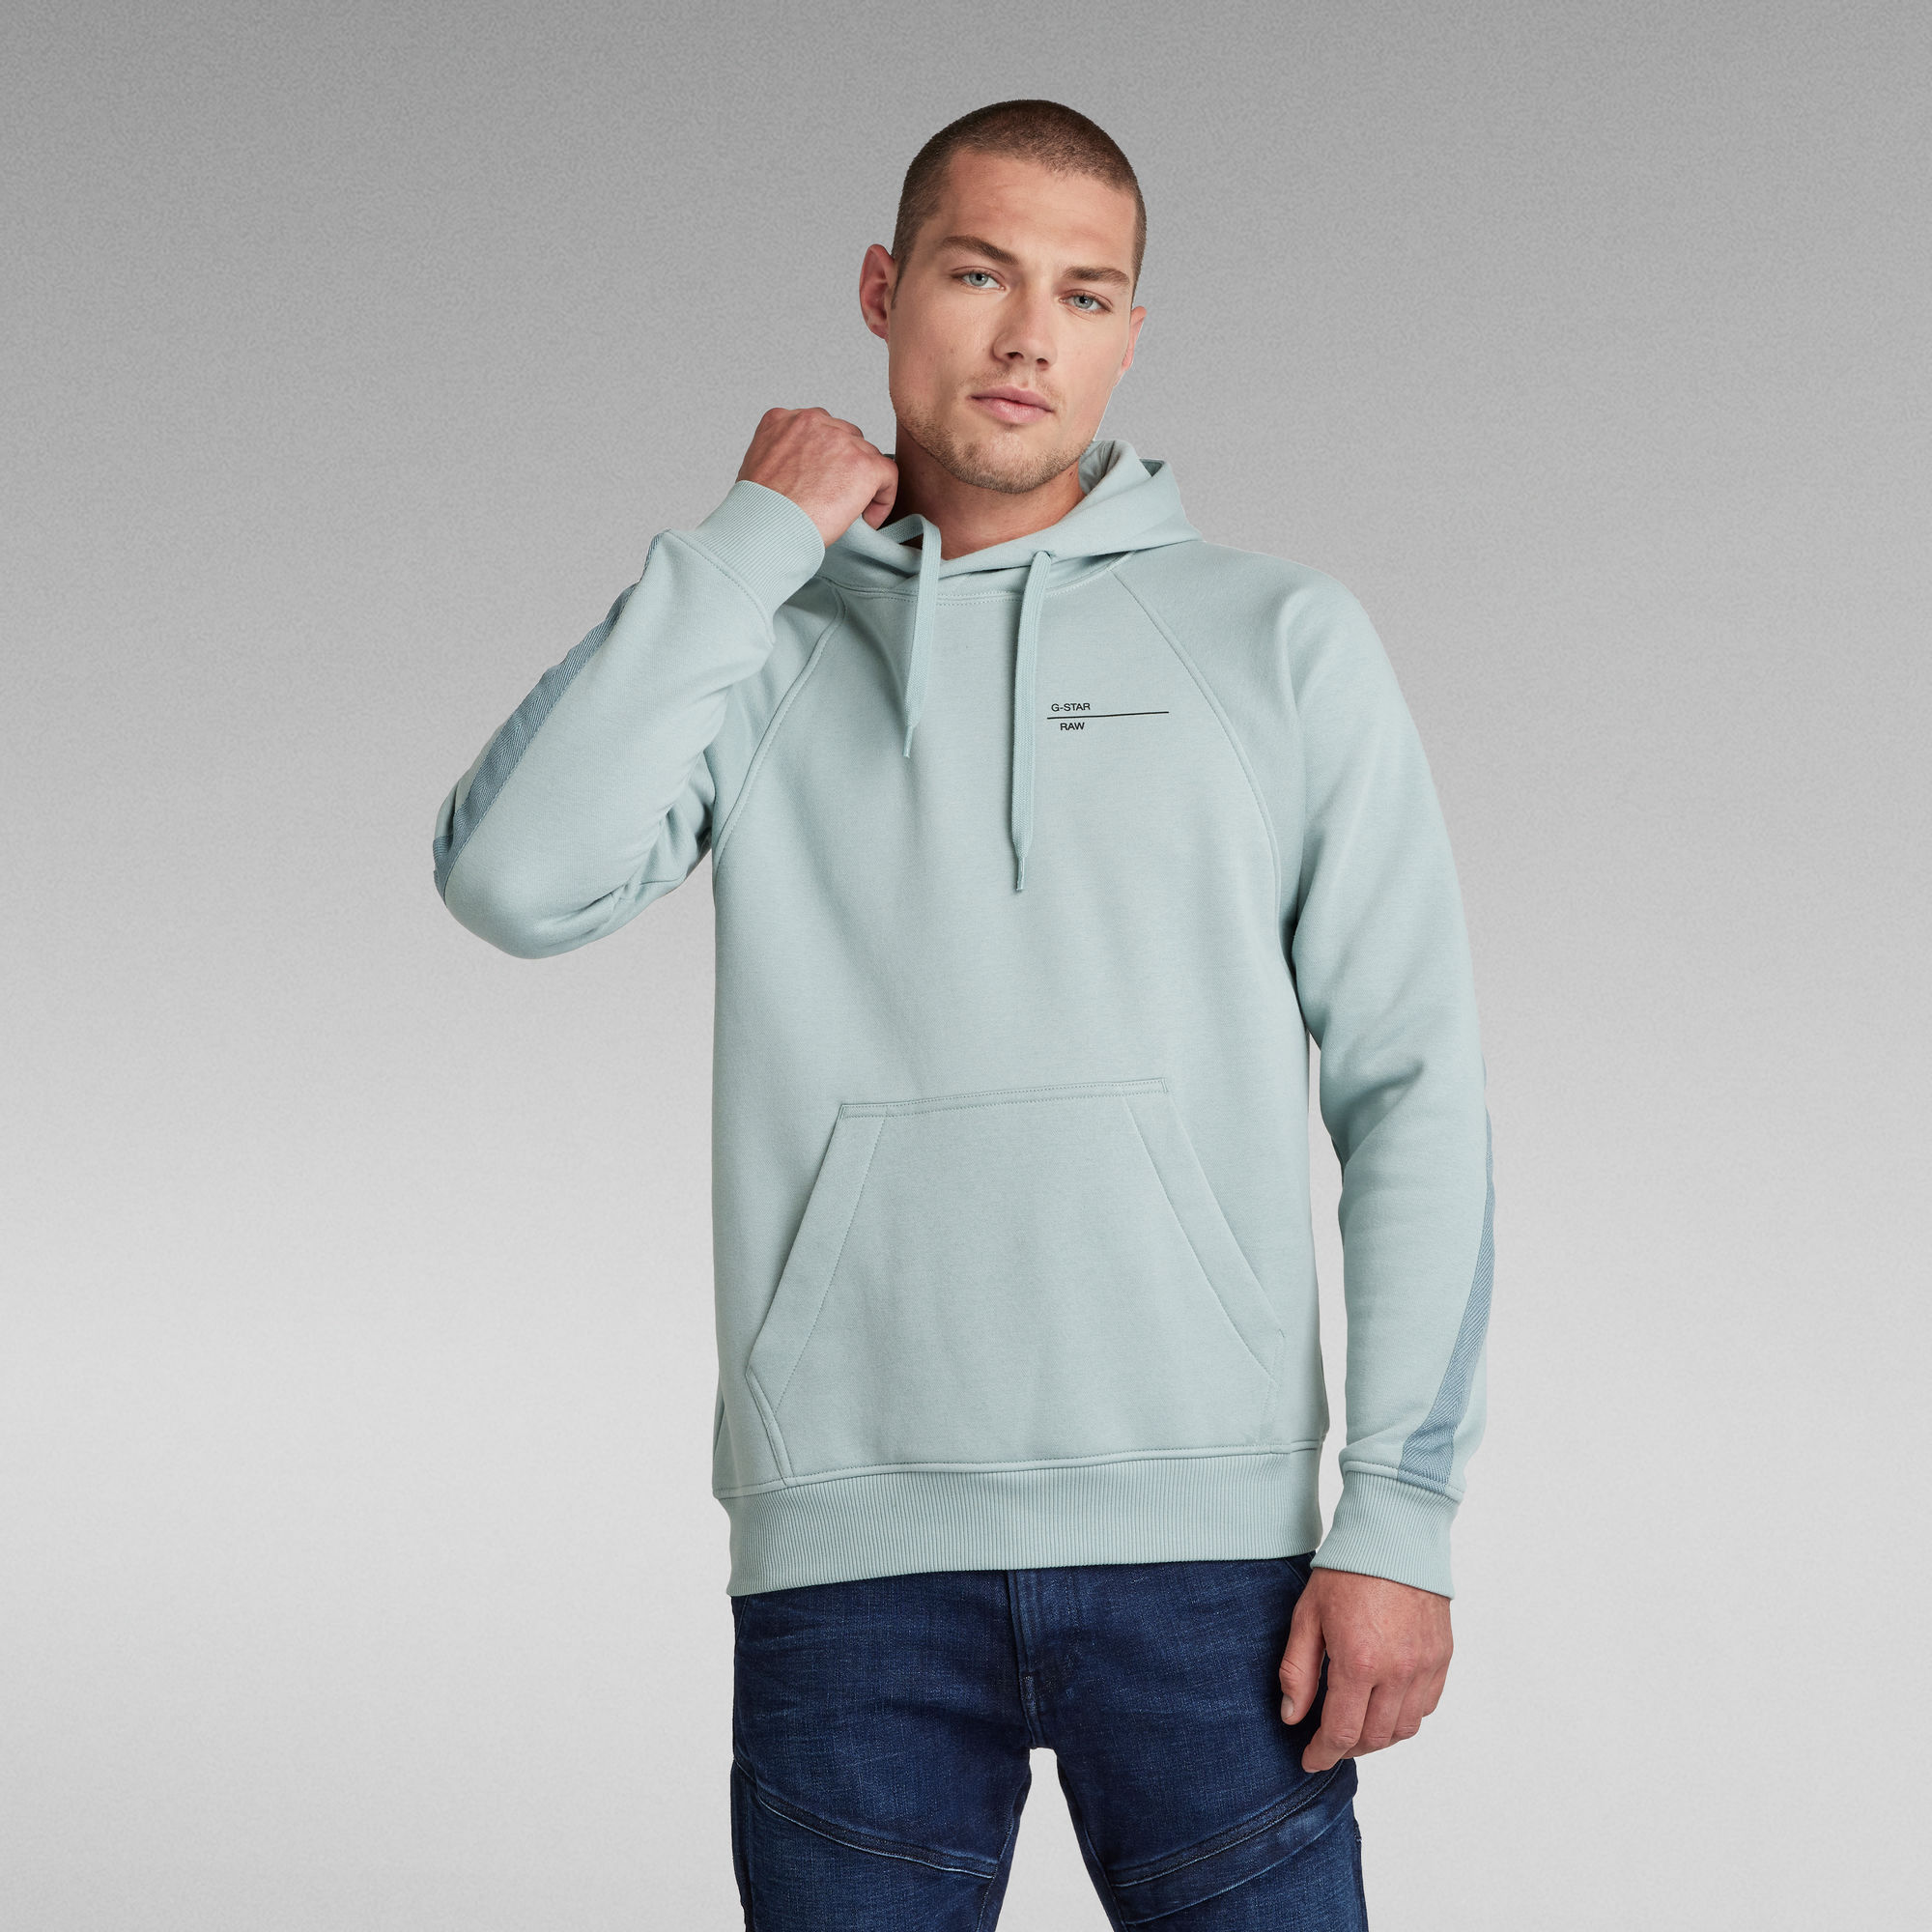 Astra Wrap Hooded Sweater | Light blue | G-Star RAW®